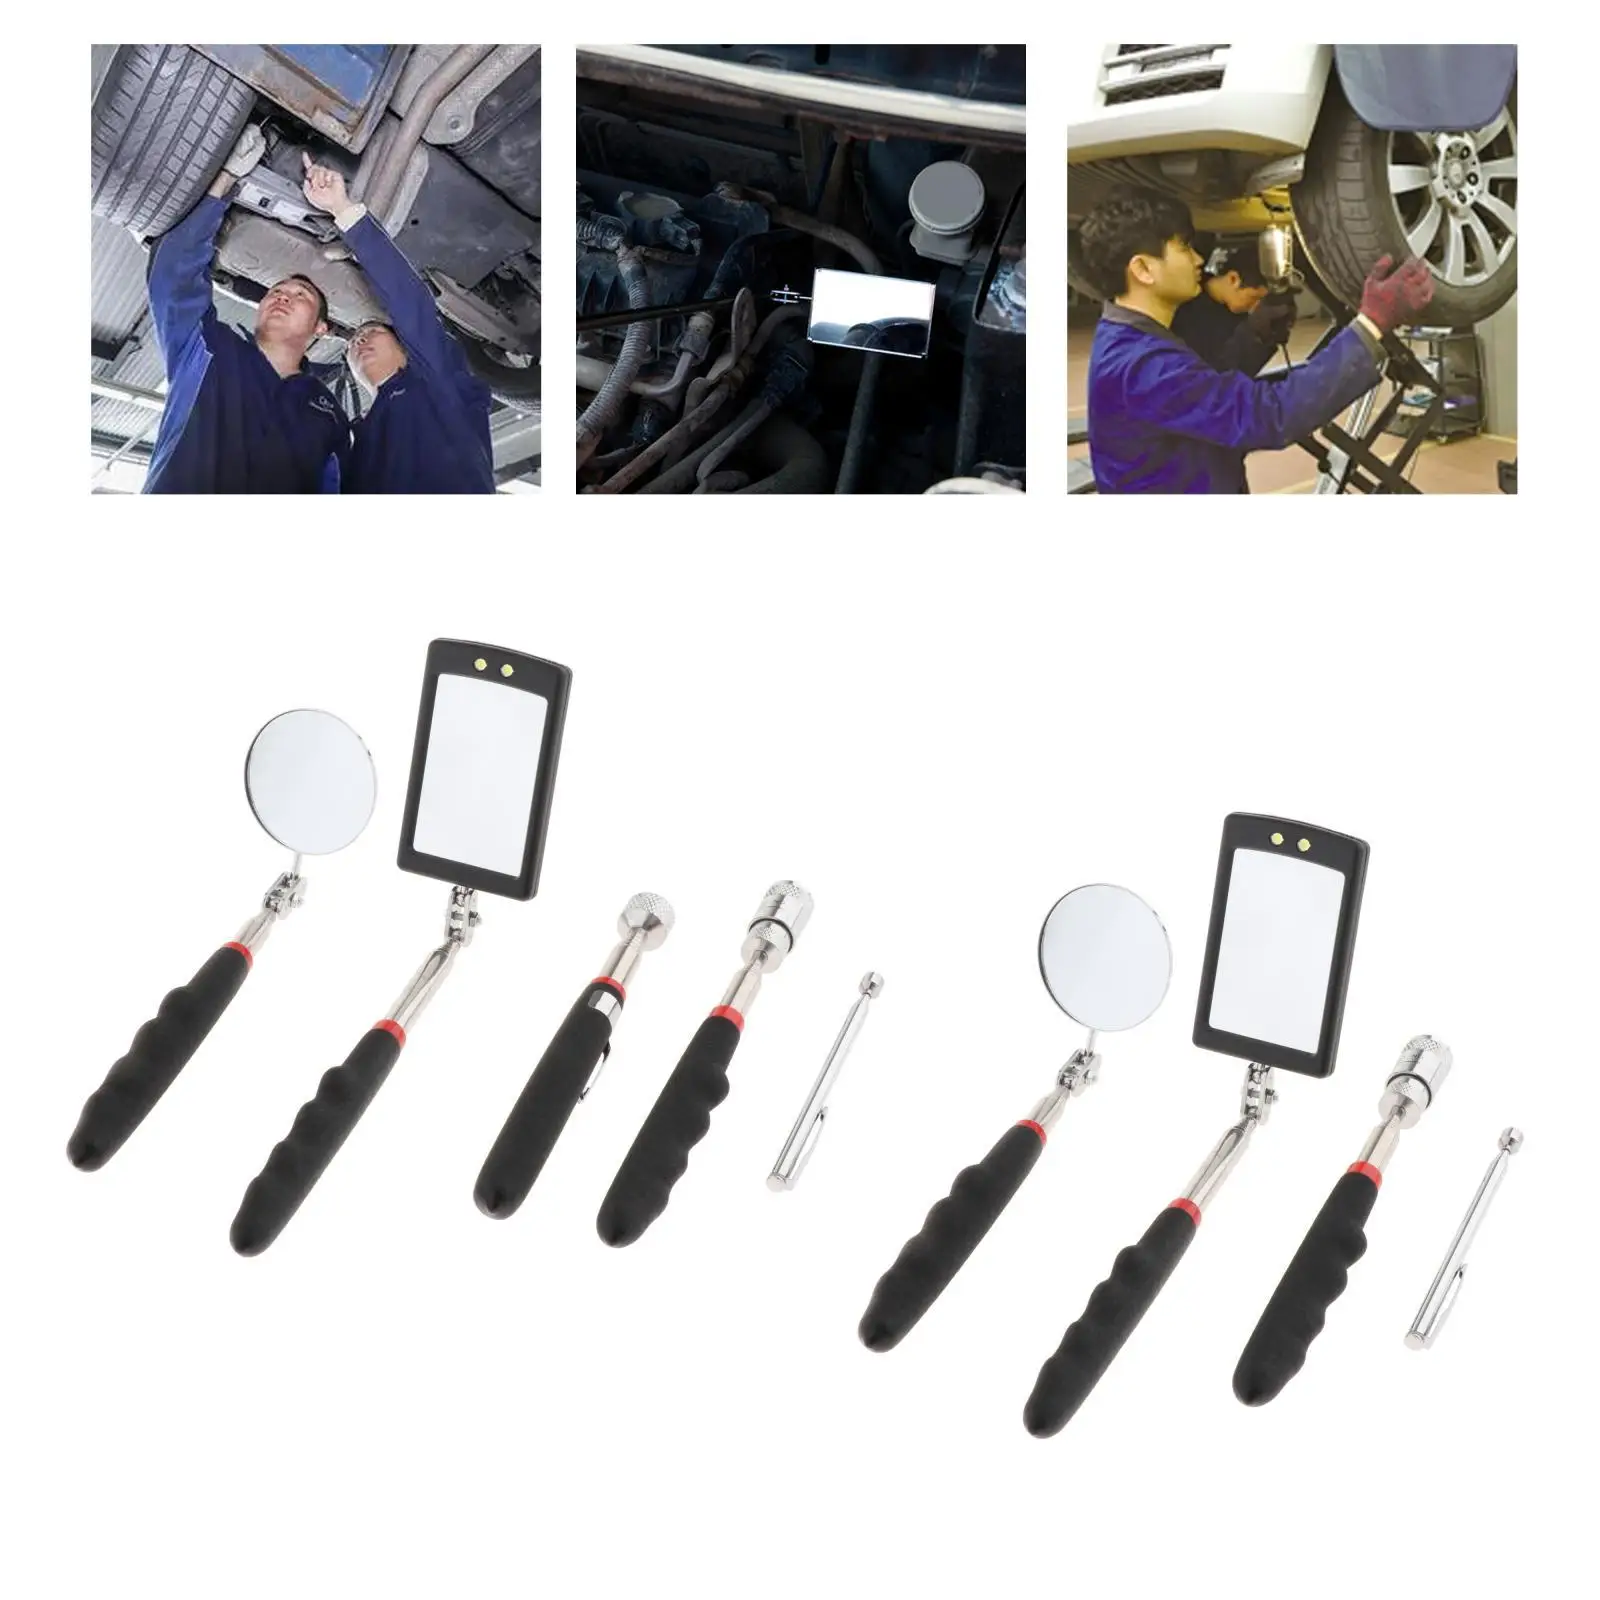 Magnetic Telescoping Pickup Tool Set with Magnetic Suction Rod Fits for Car Maintenance